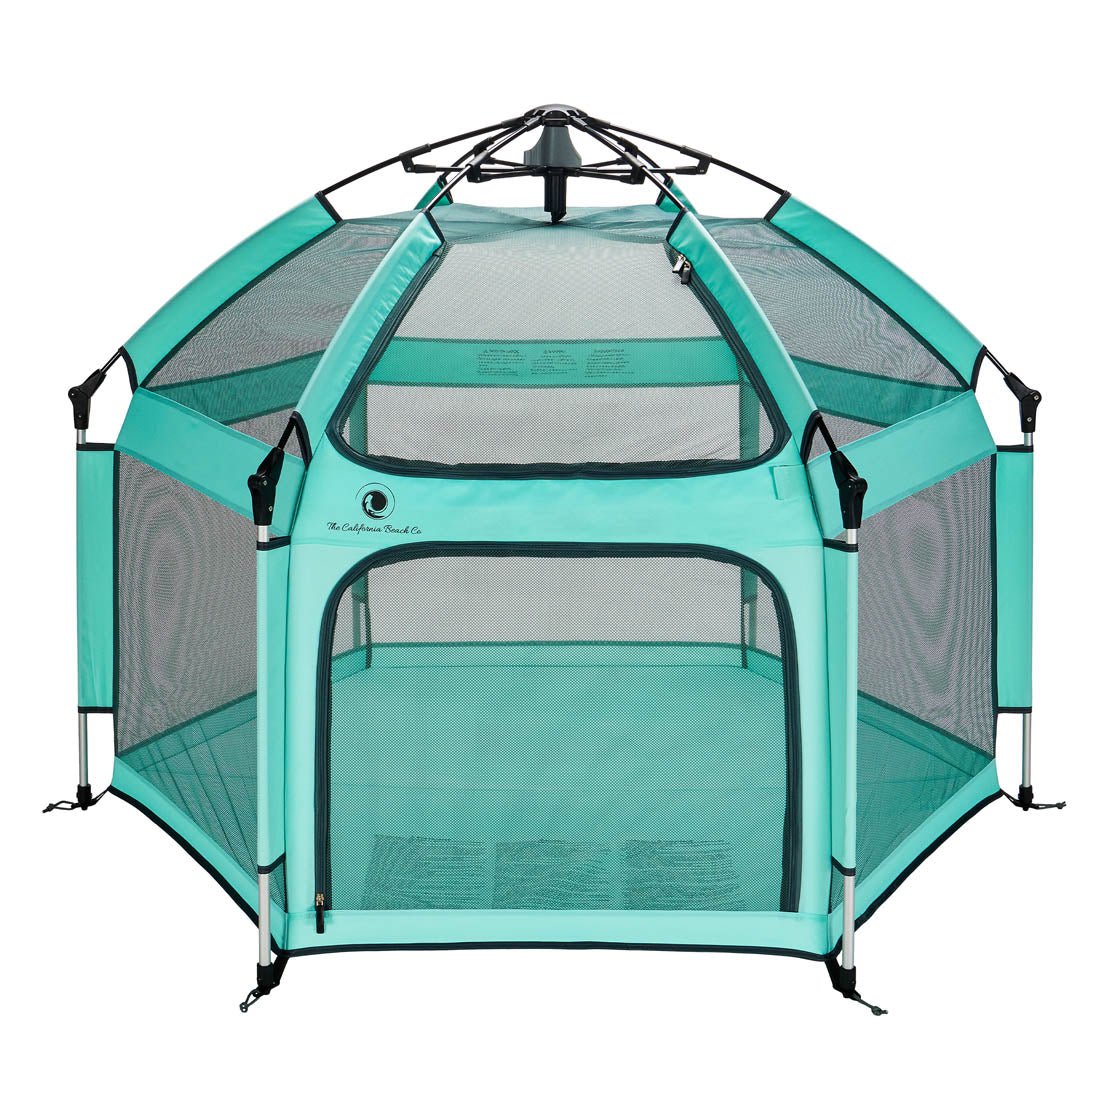 BabyBond Baby Playpen Pop-Up Dome Tent with Canopy and Mat For Outdoor Use